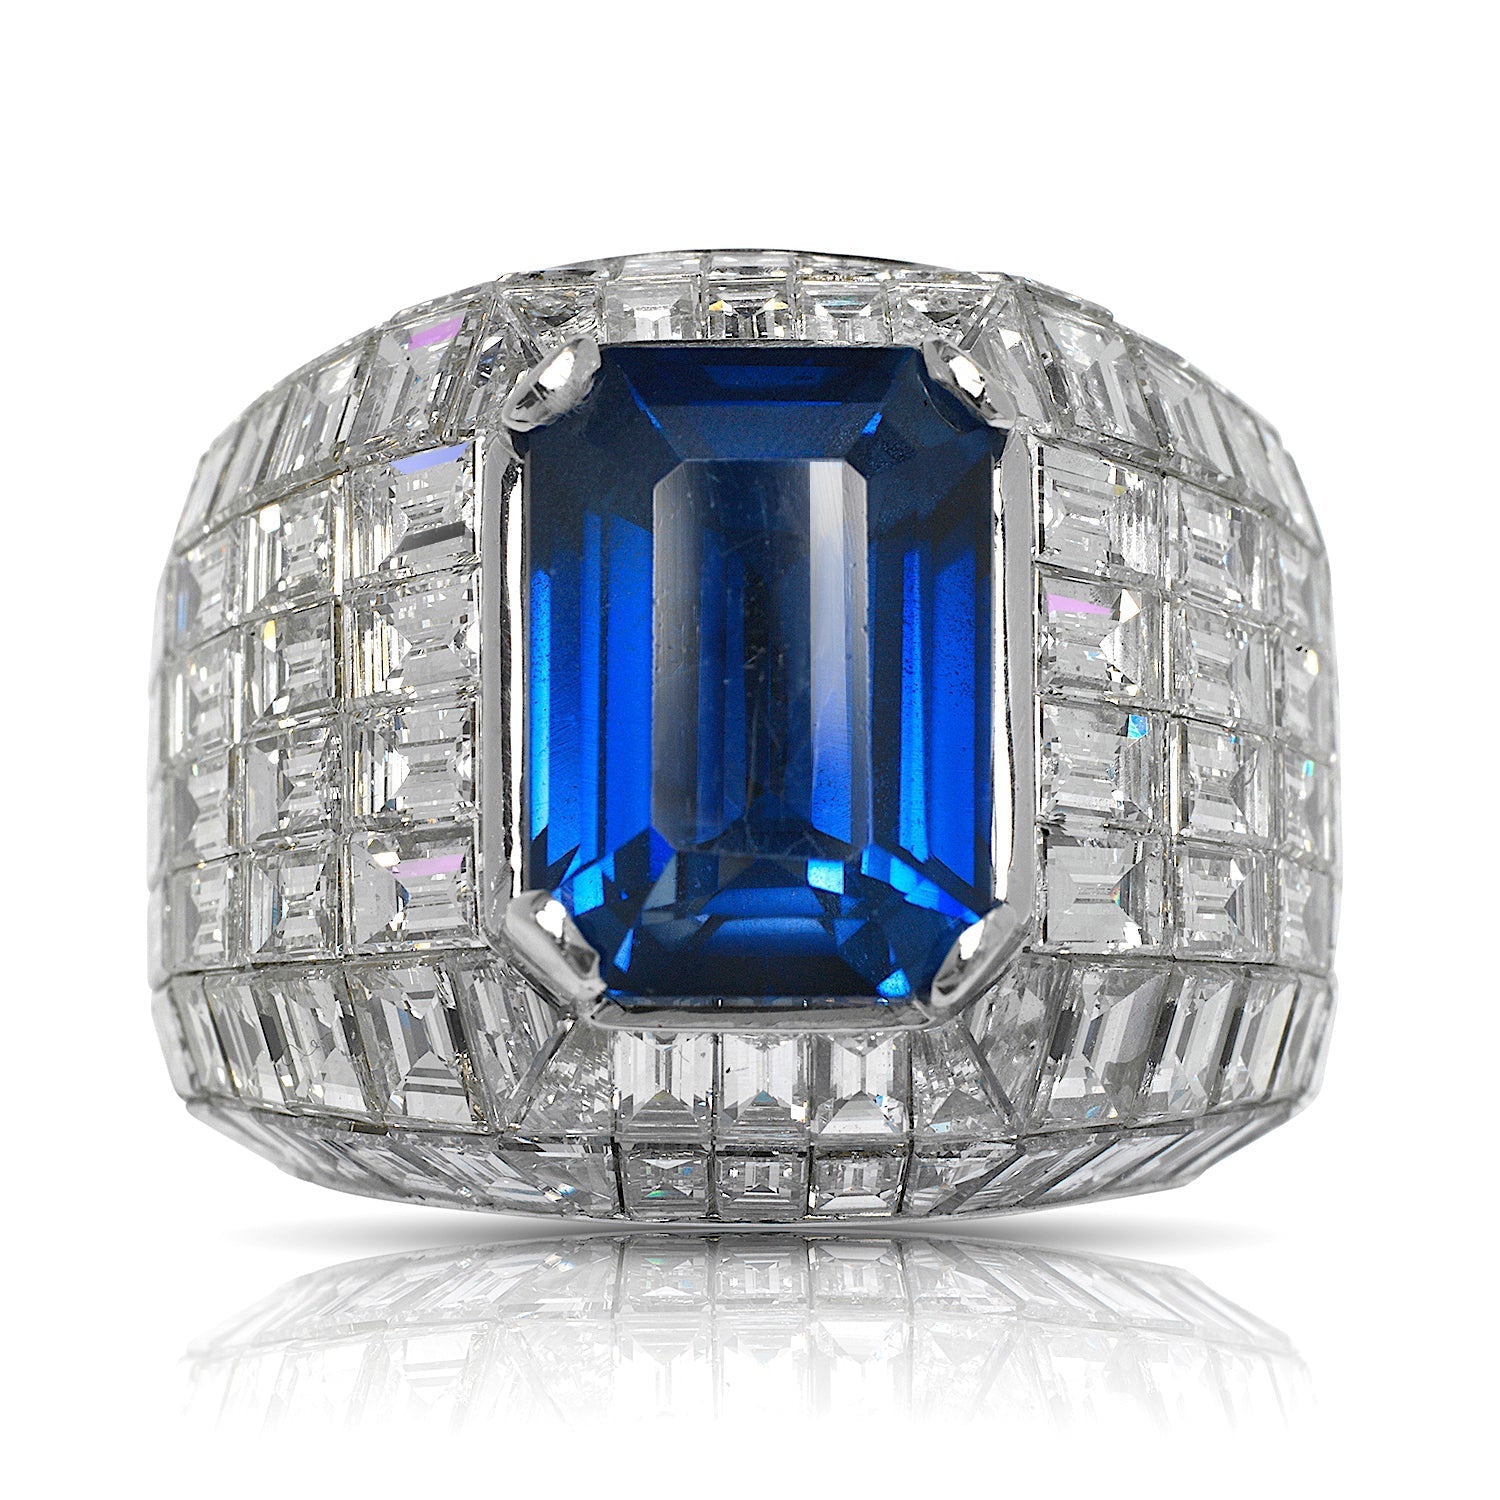 Vivid blue diamond could sell for $50 million at Christie's auction |  Reuters